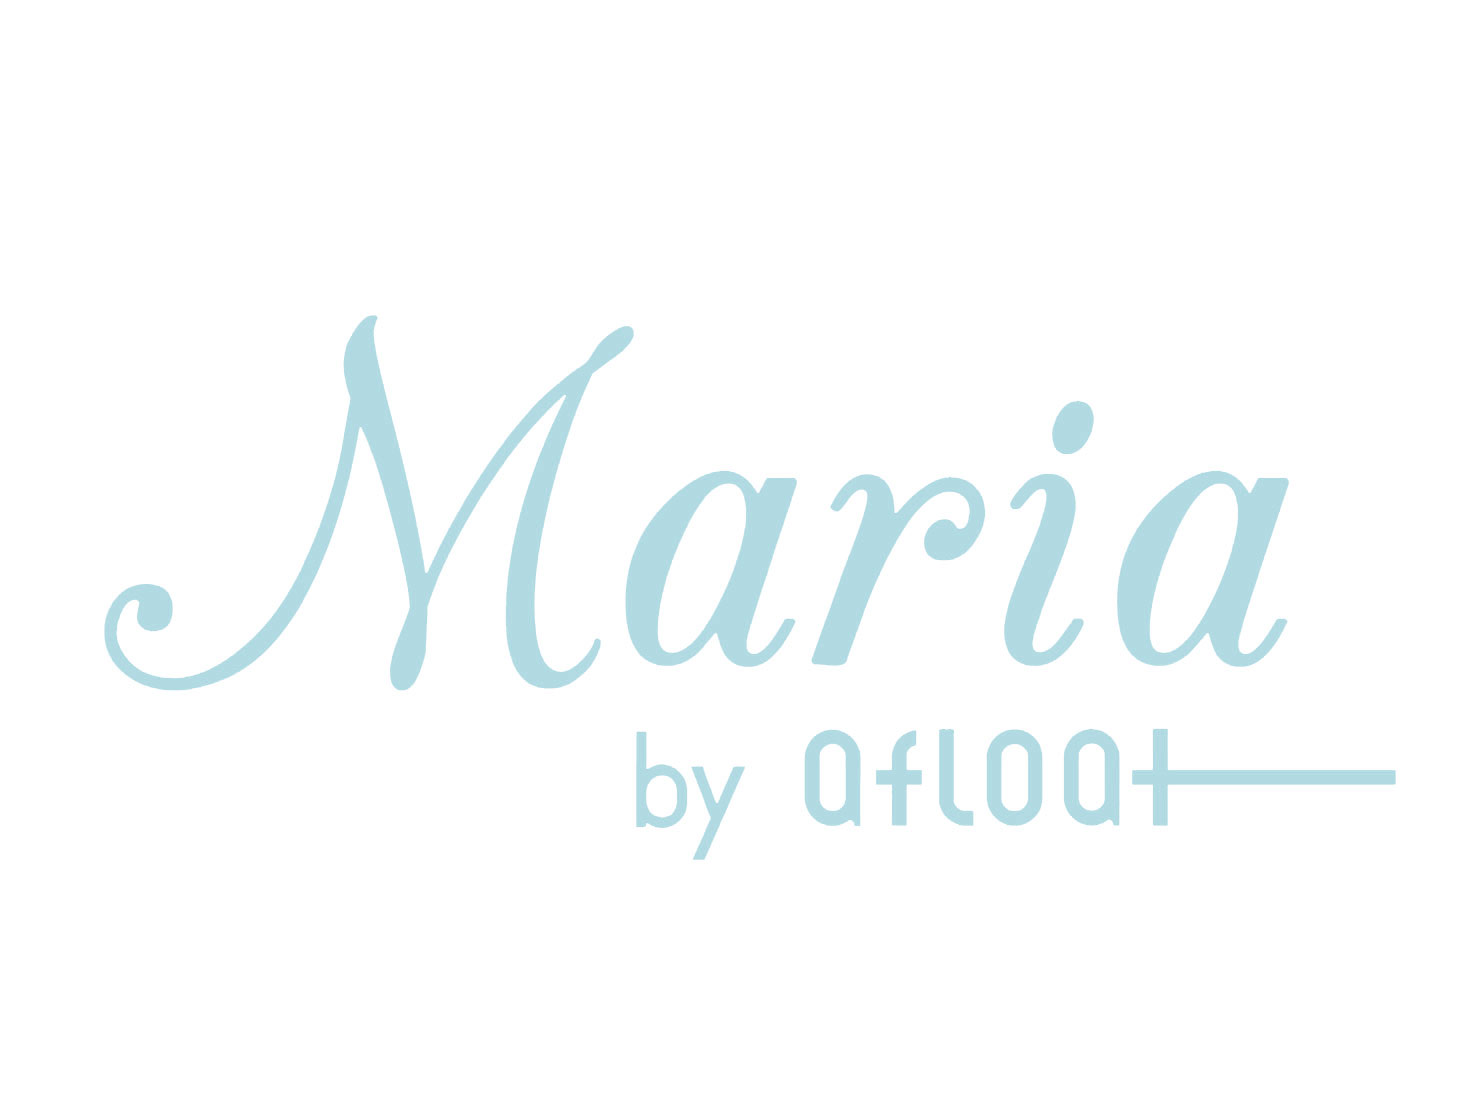 Maria by ofloot